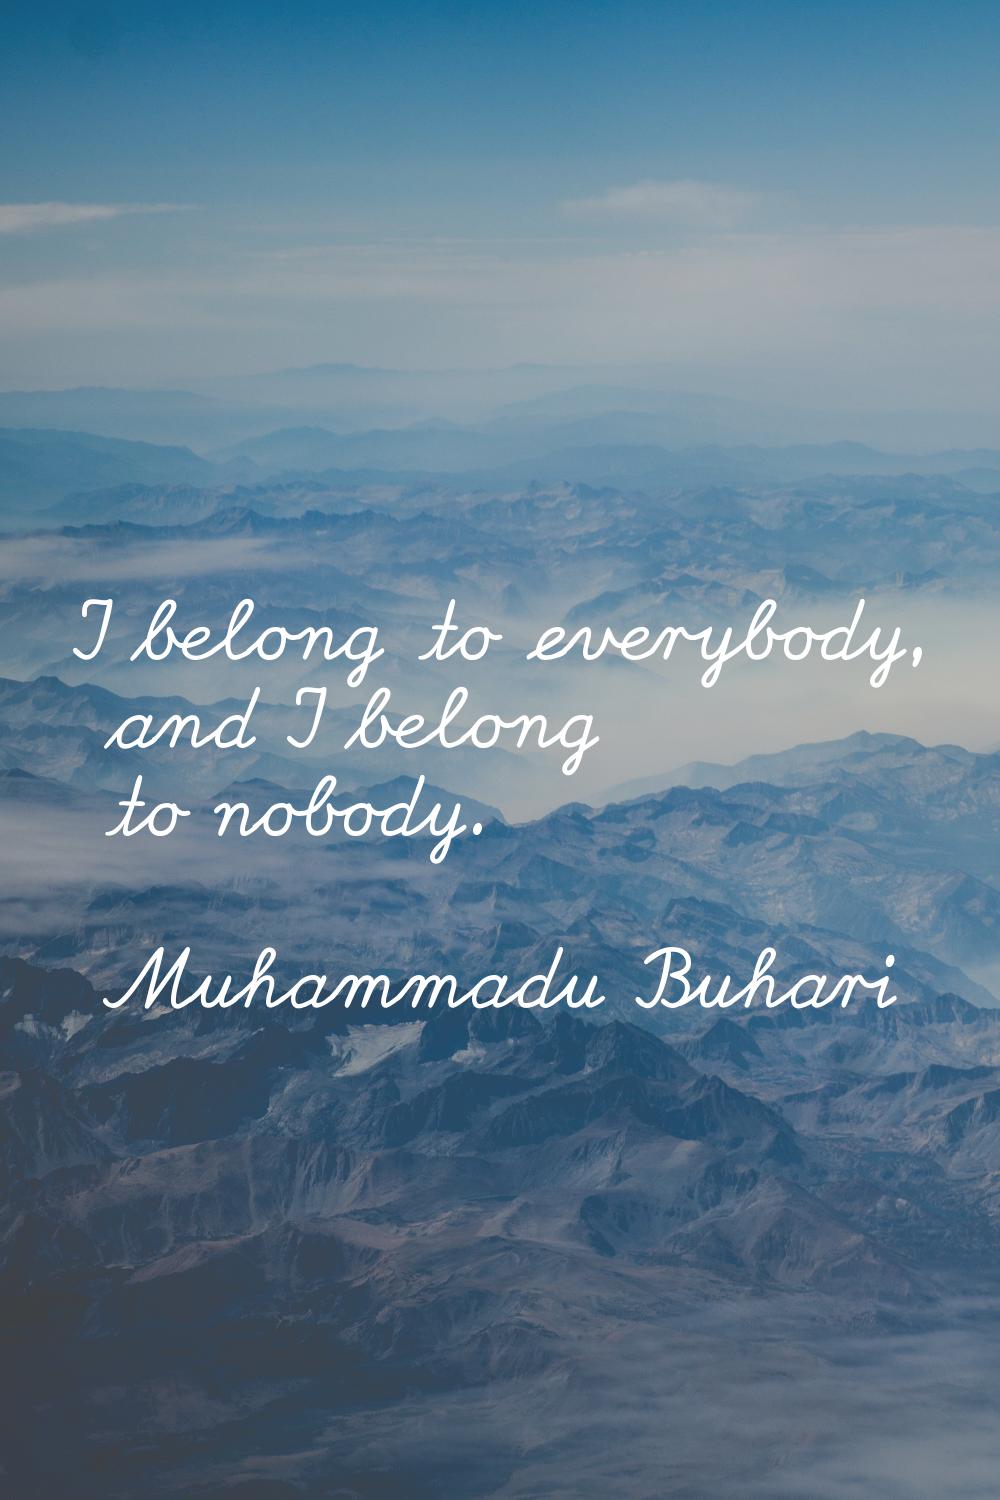 I belong to everybody, and I belong to nobody.